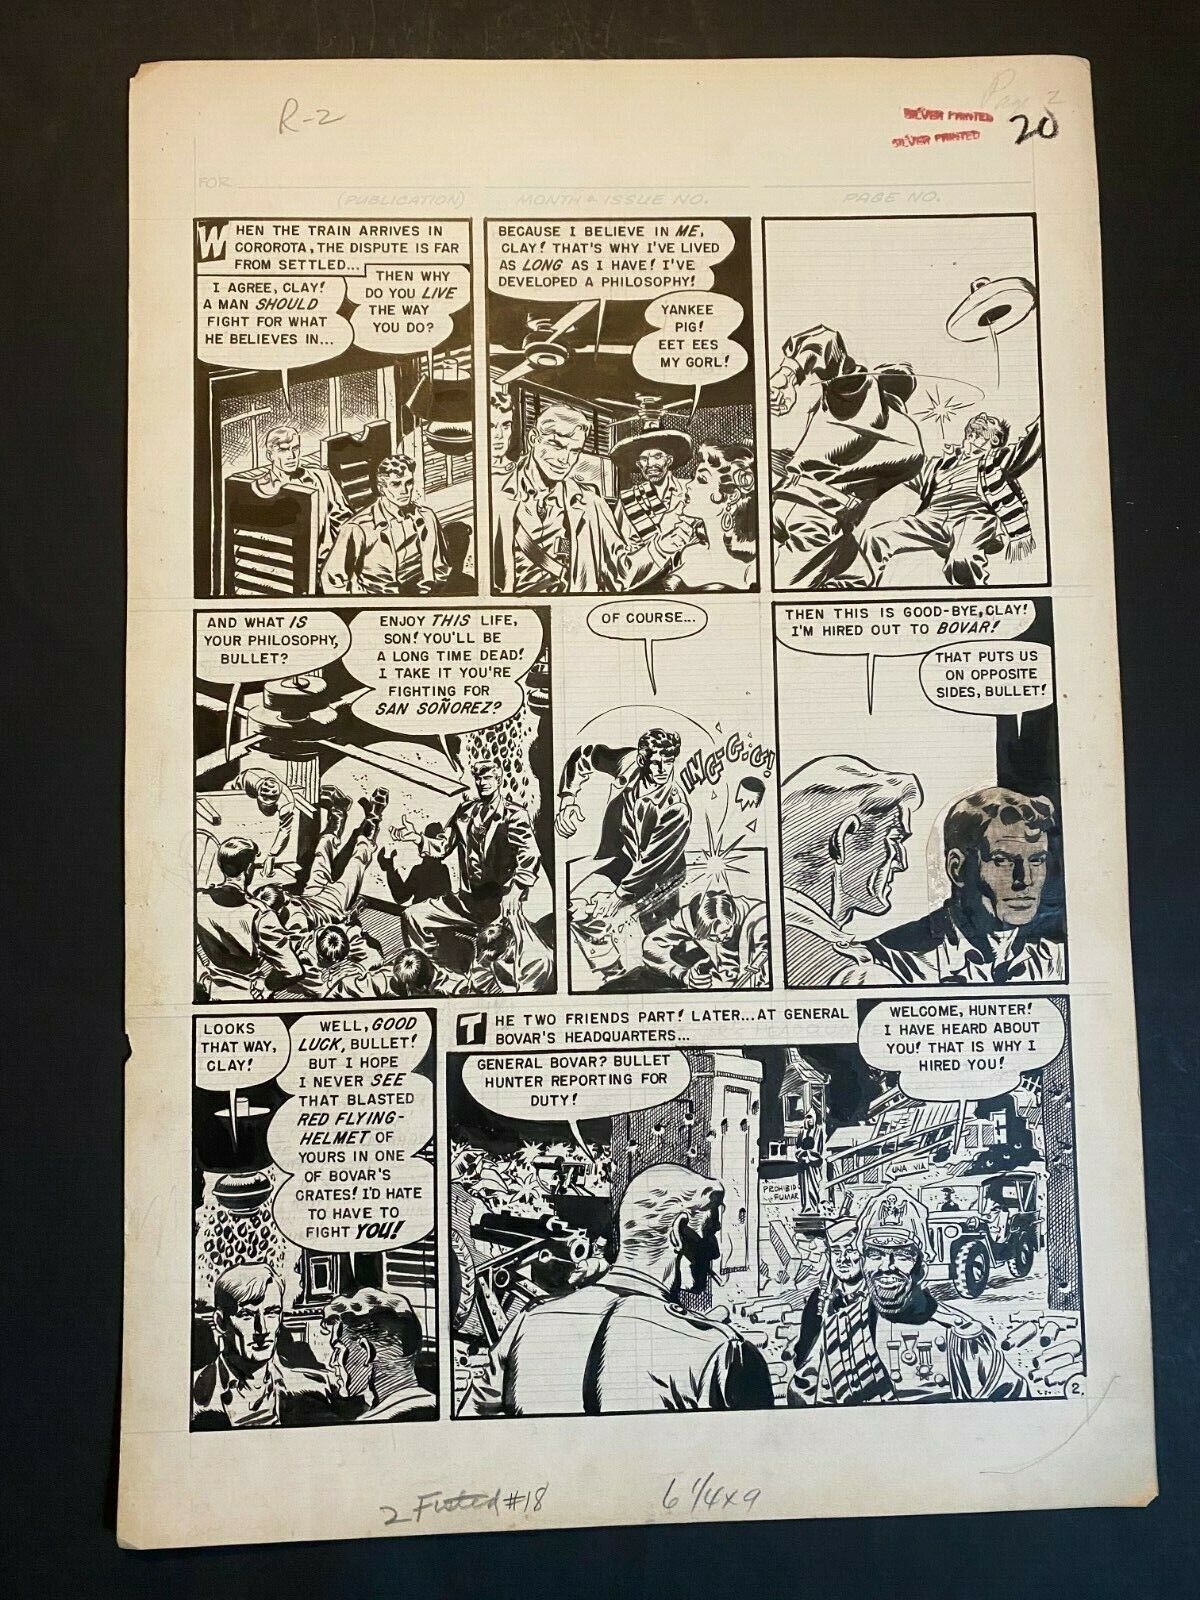 TWO FISTED TALES #18 ORIGINAL ARTWORK BY WALLY WOOD PAGE 2